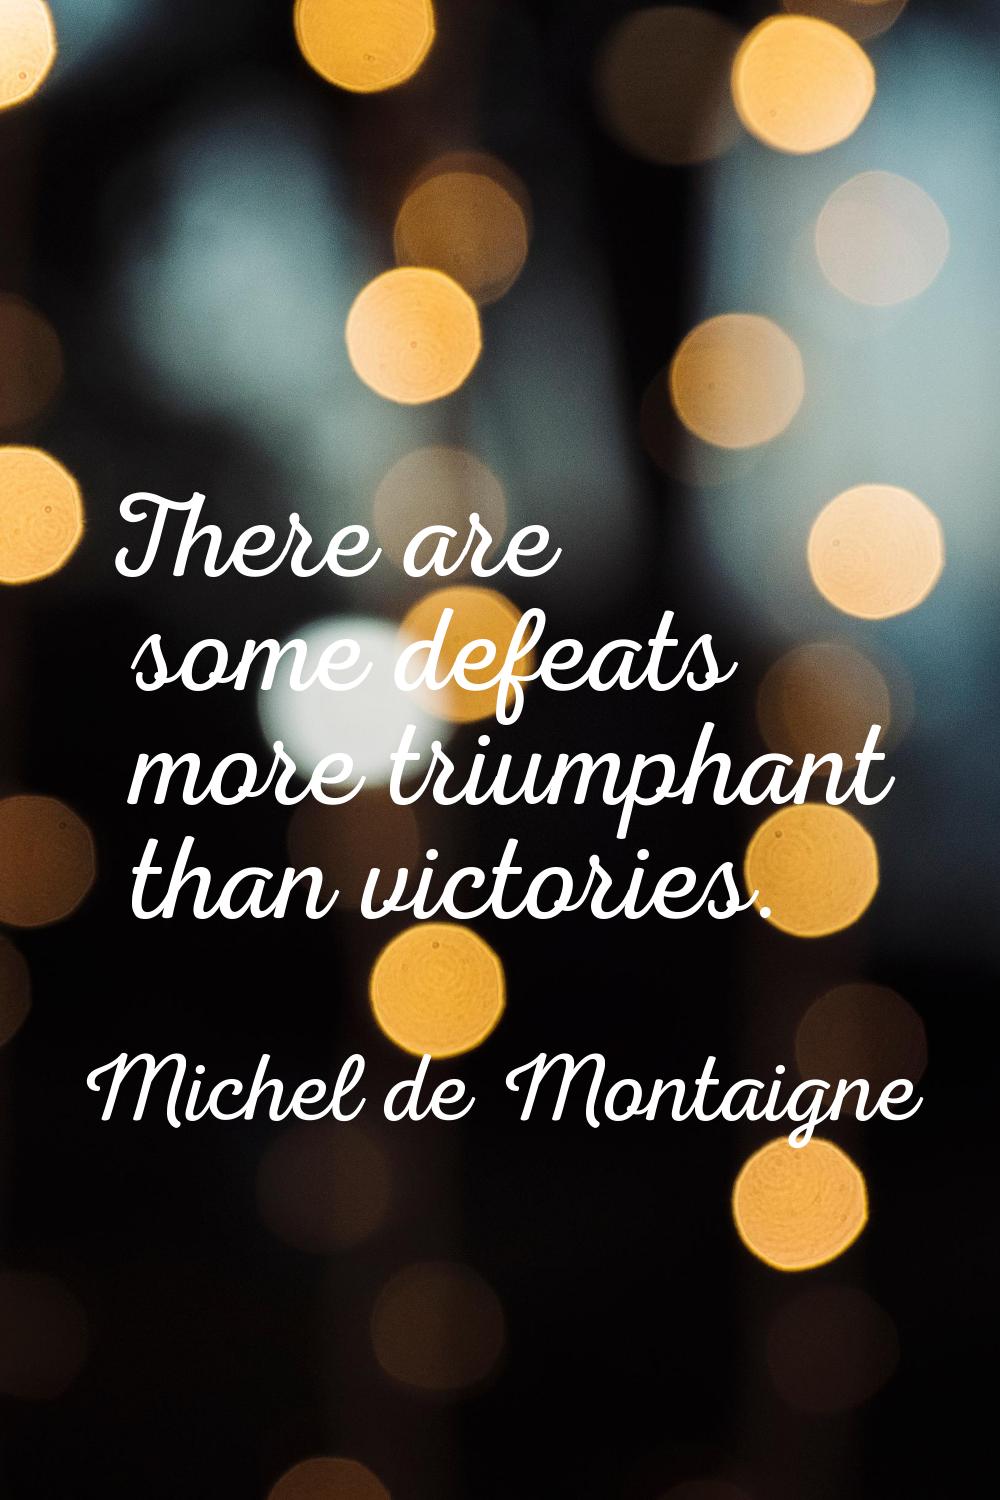 There are some defeats more triumphant than victories.